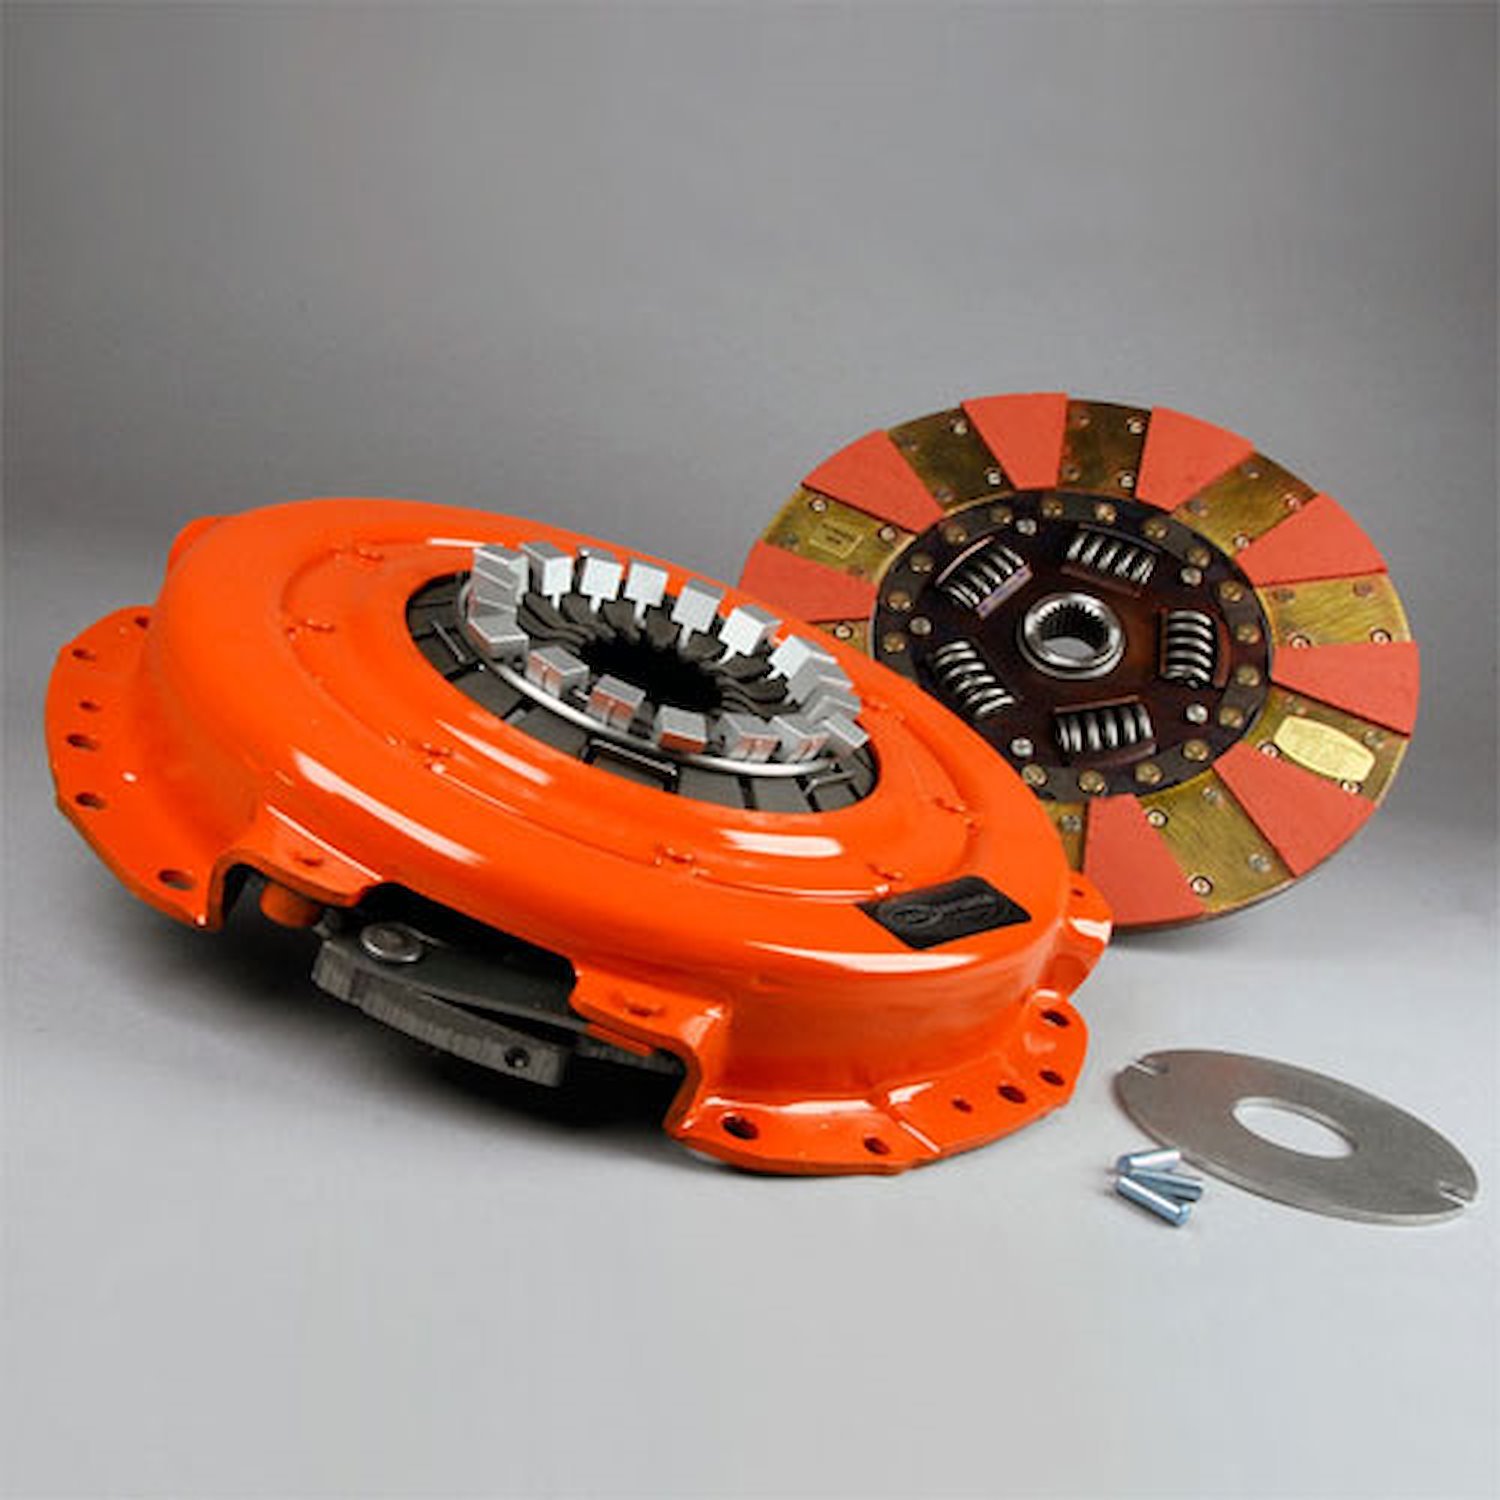 Dual Friction Clutch Includes Pressure Plate, Disc, Bolts, Dowel Pins, Shim, & Bleed Kit